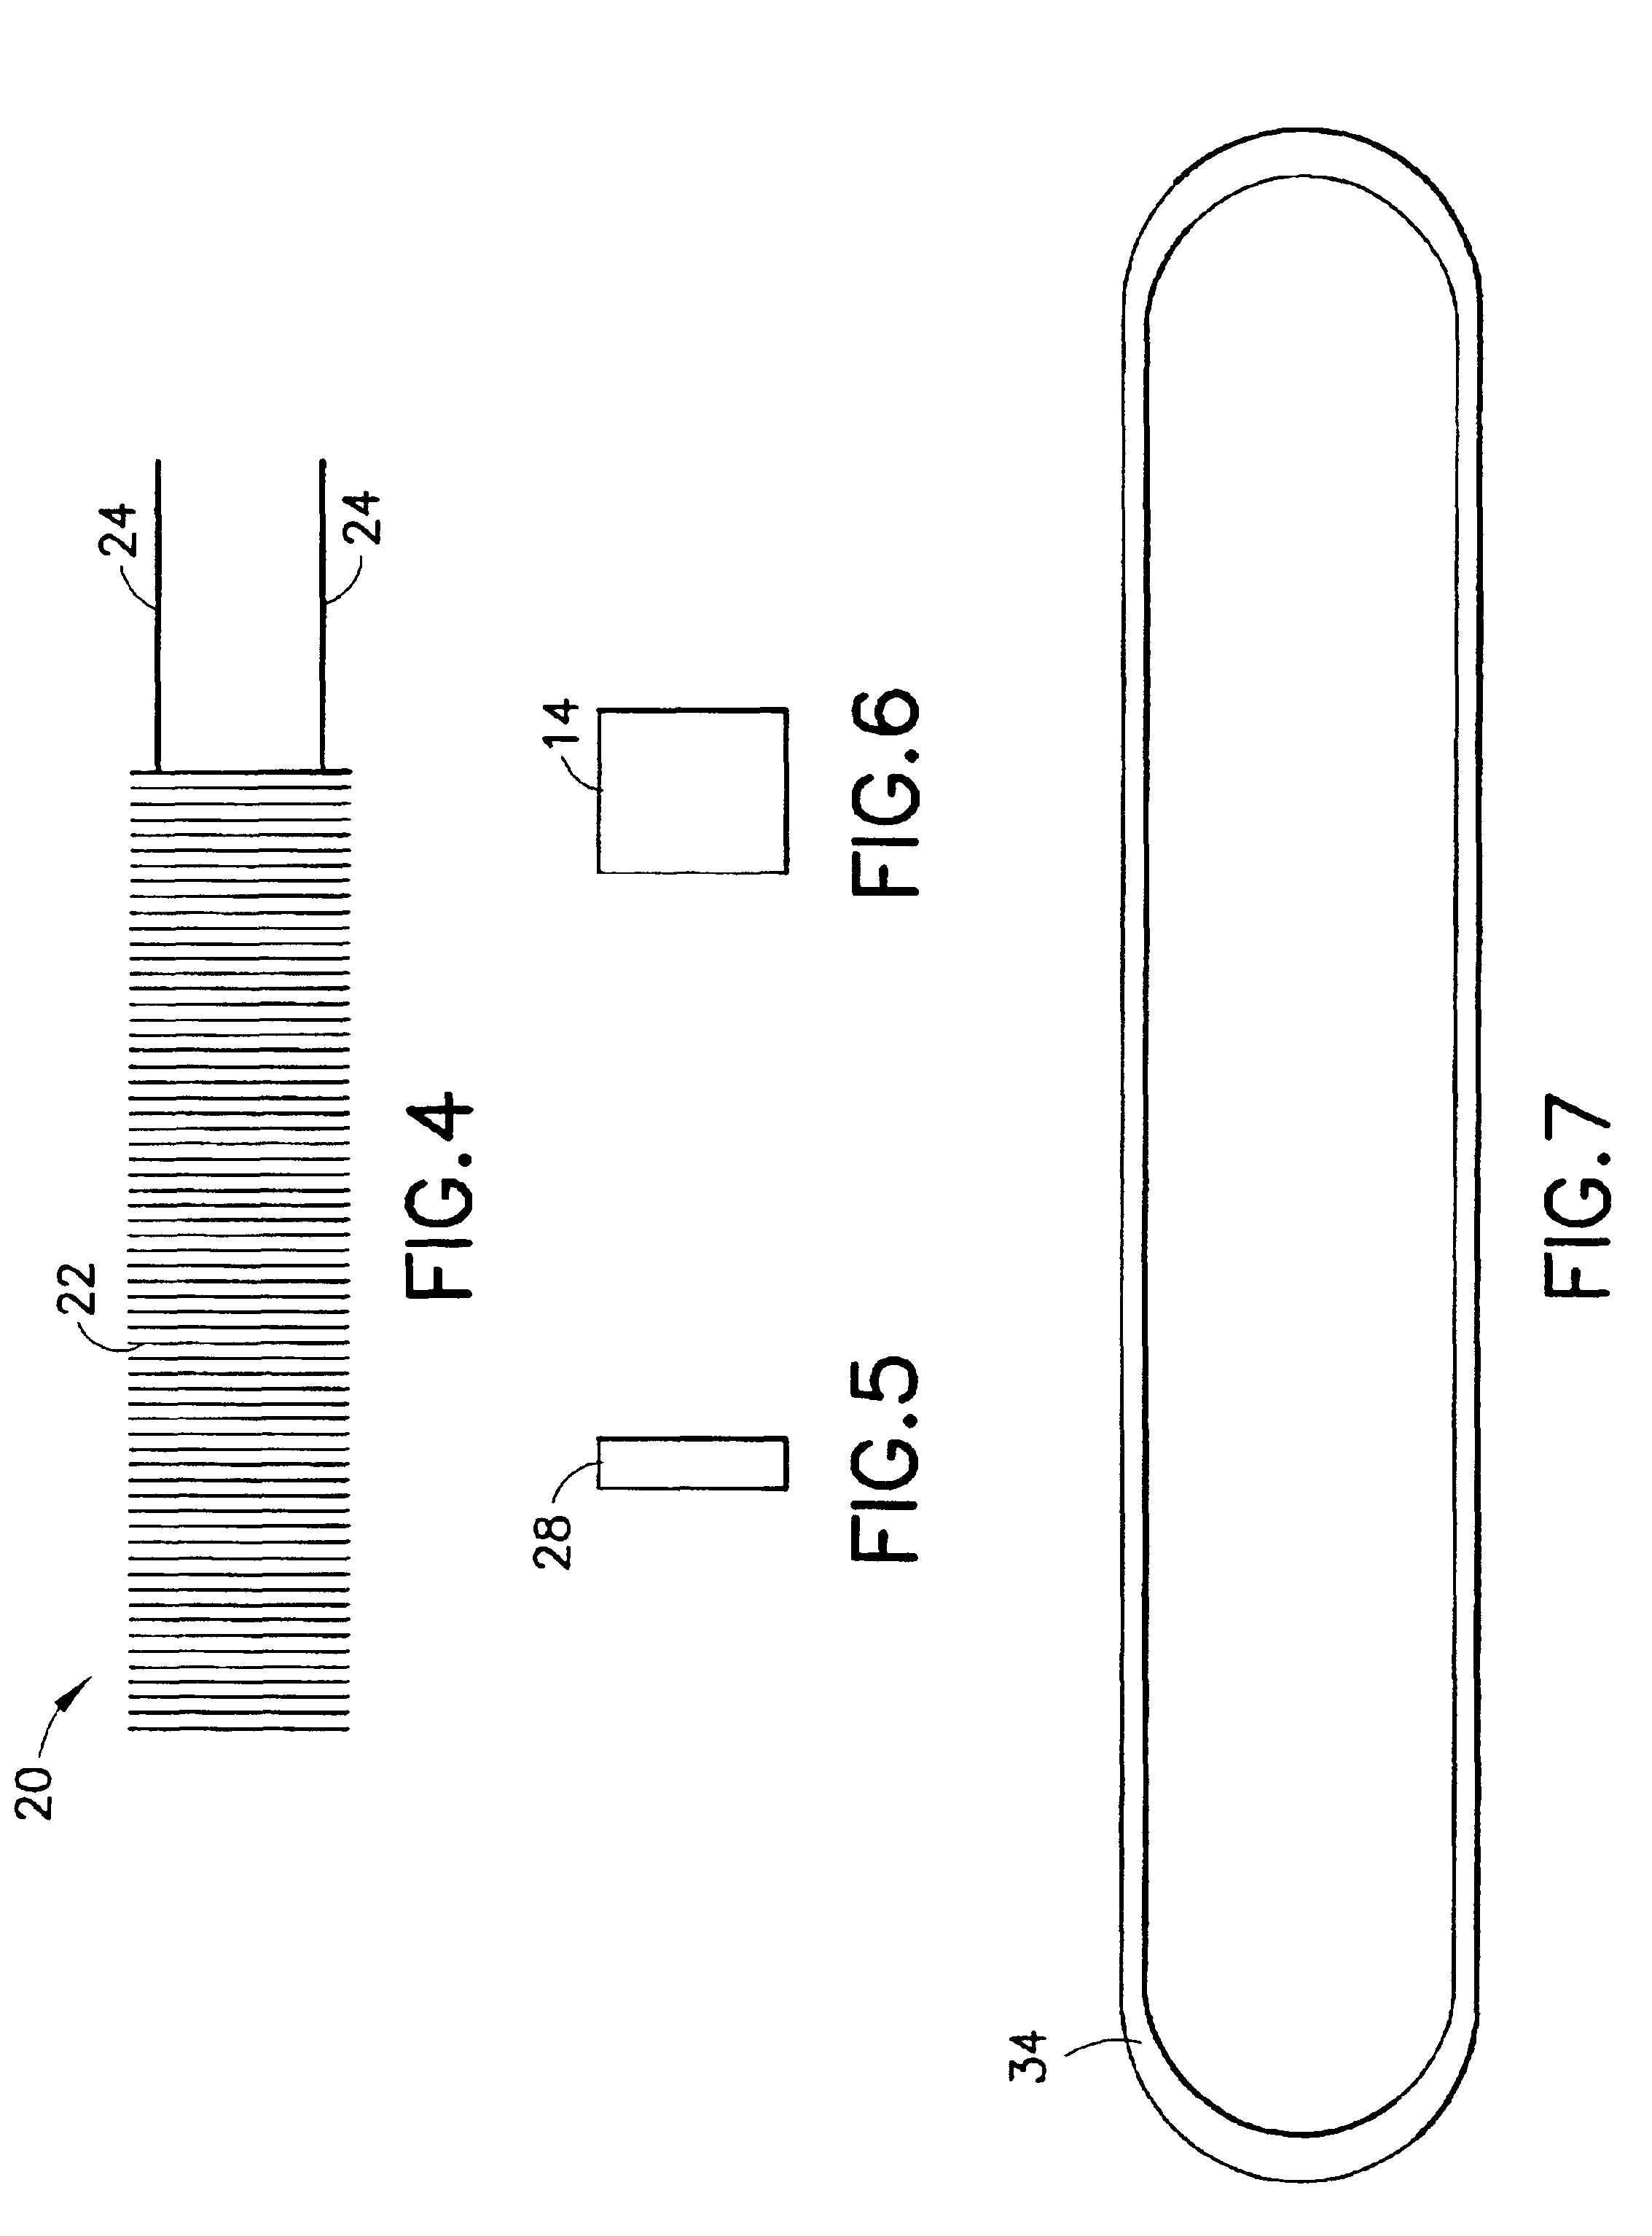 Passive integrated transponder tag with unitary antenna core